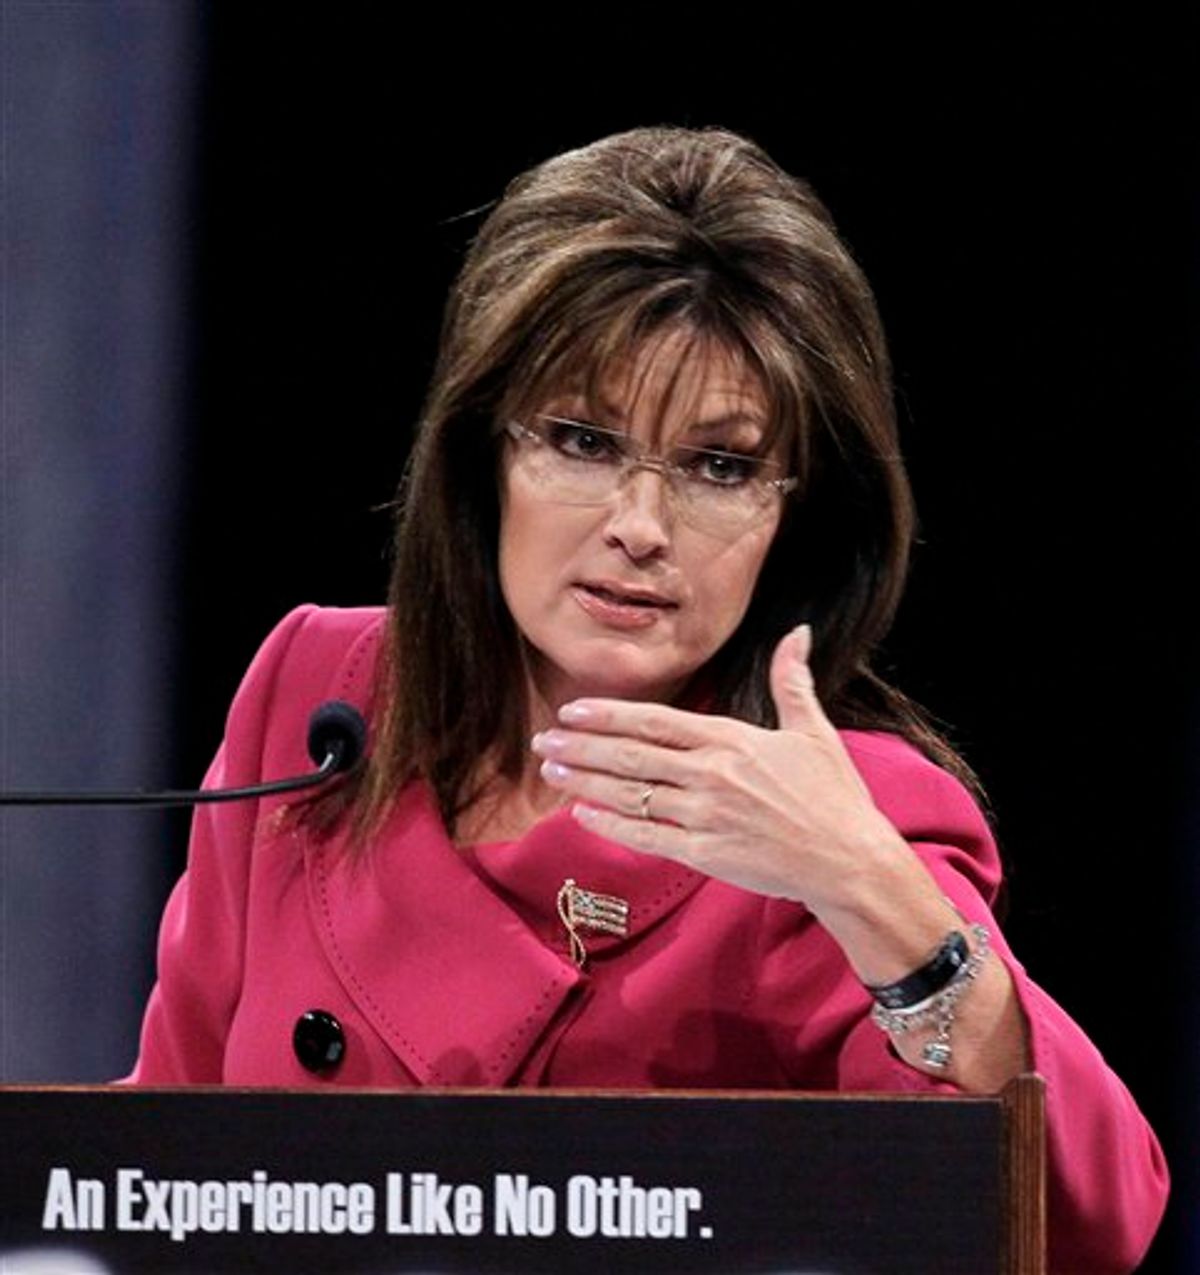 Former Republican vice presidential candidate Sarah Palin gestures while addressing the National Quartet Convention in Louisville, Ky., Thursday, Sept. 16, 2010.  (AP Photo/Ed Reinke) (AP)